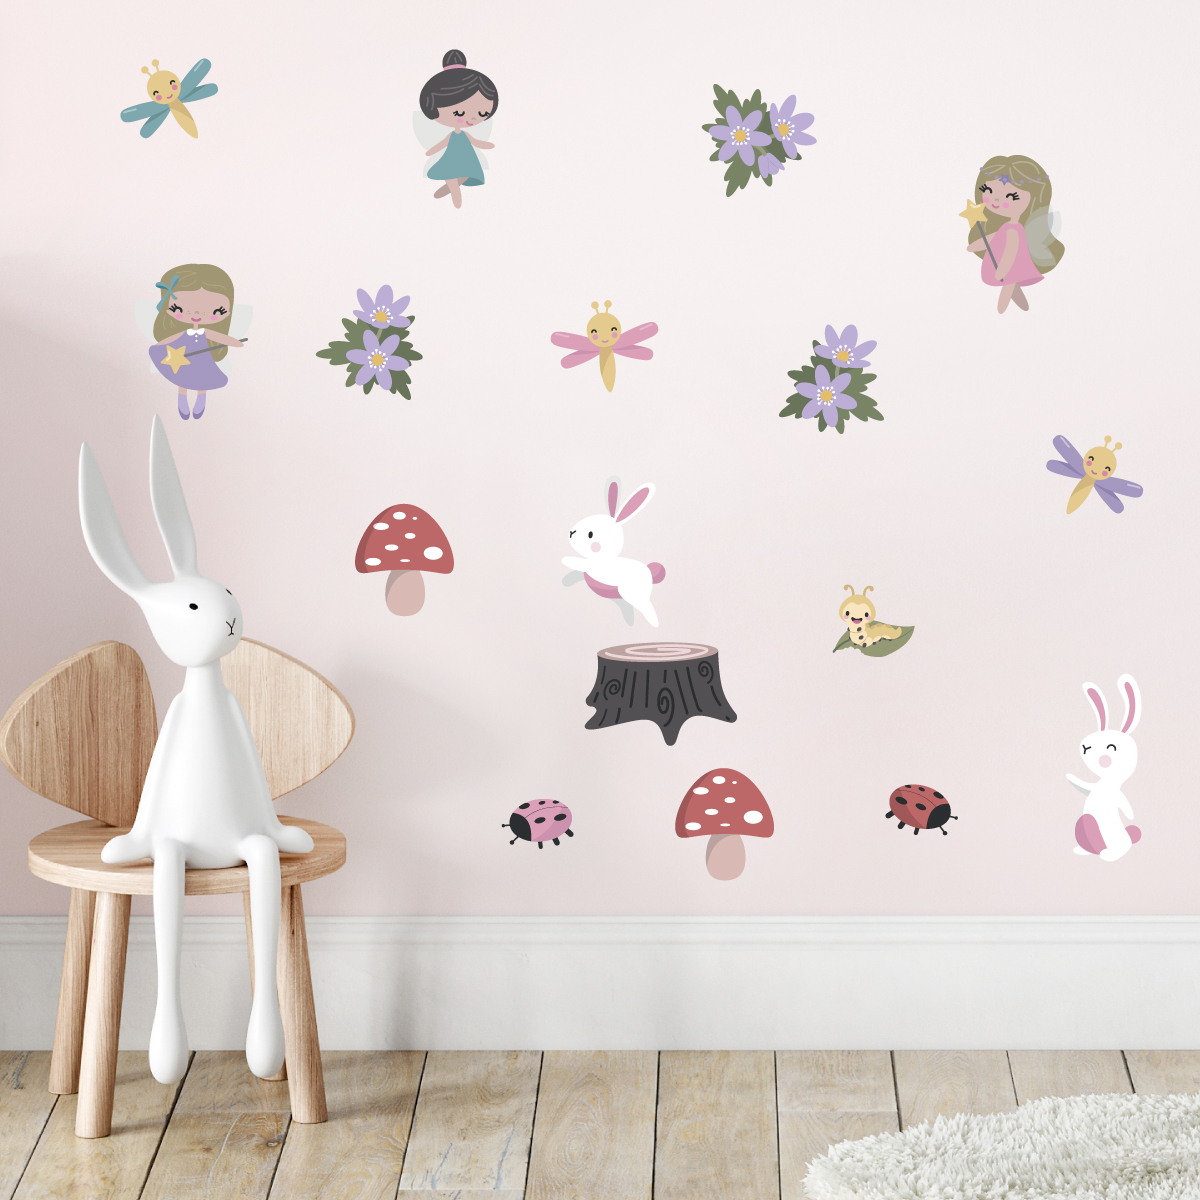 Wall decals and stickers with fairies